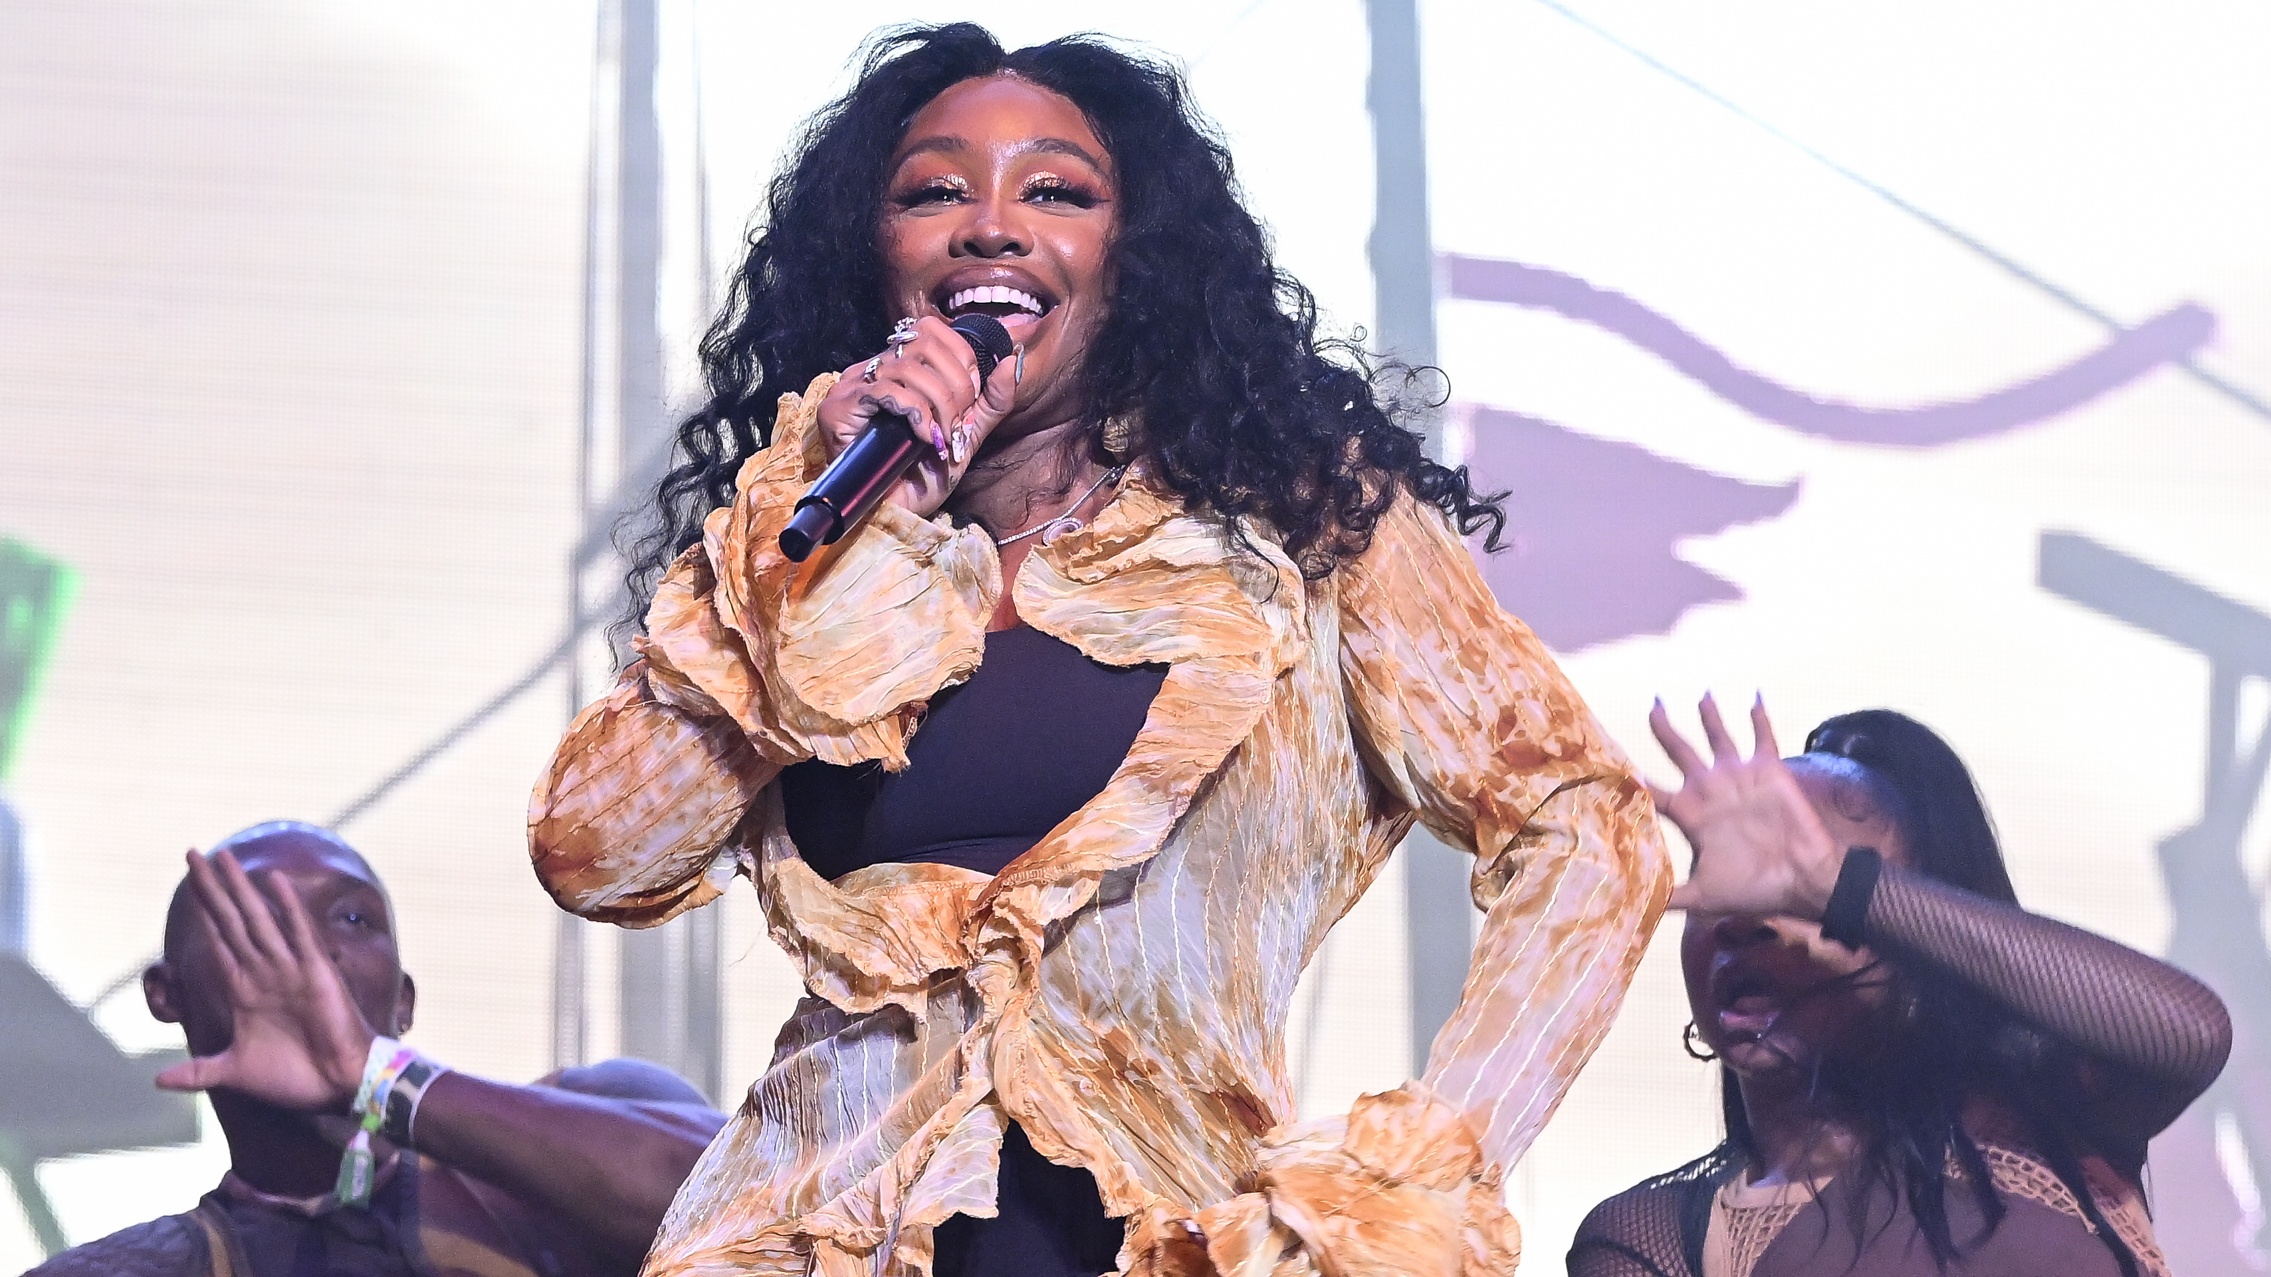 Happy Birthday, SZA! The Ultimate Playlist Complete With SZA’s Top Hits!